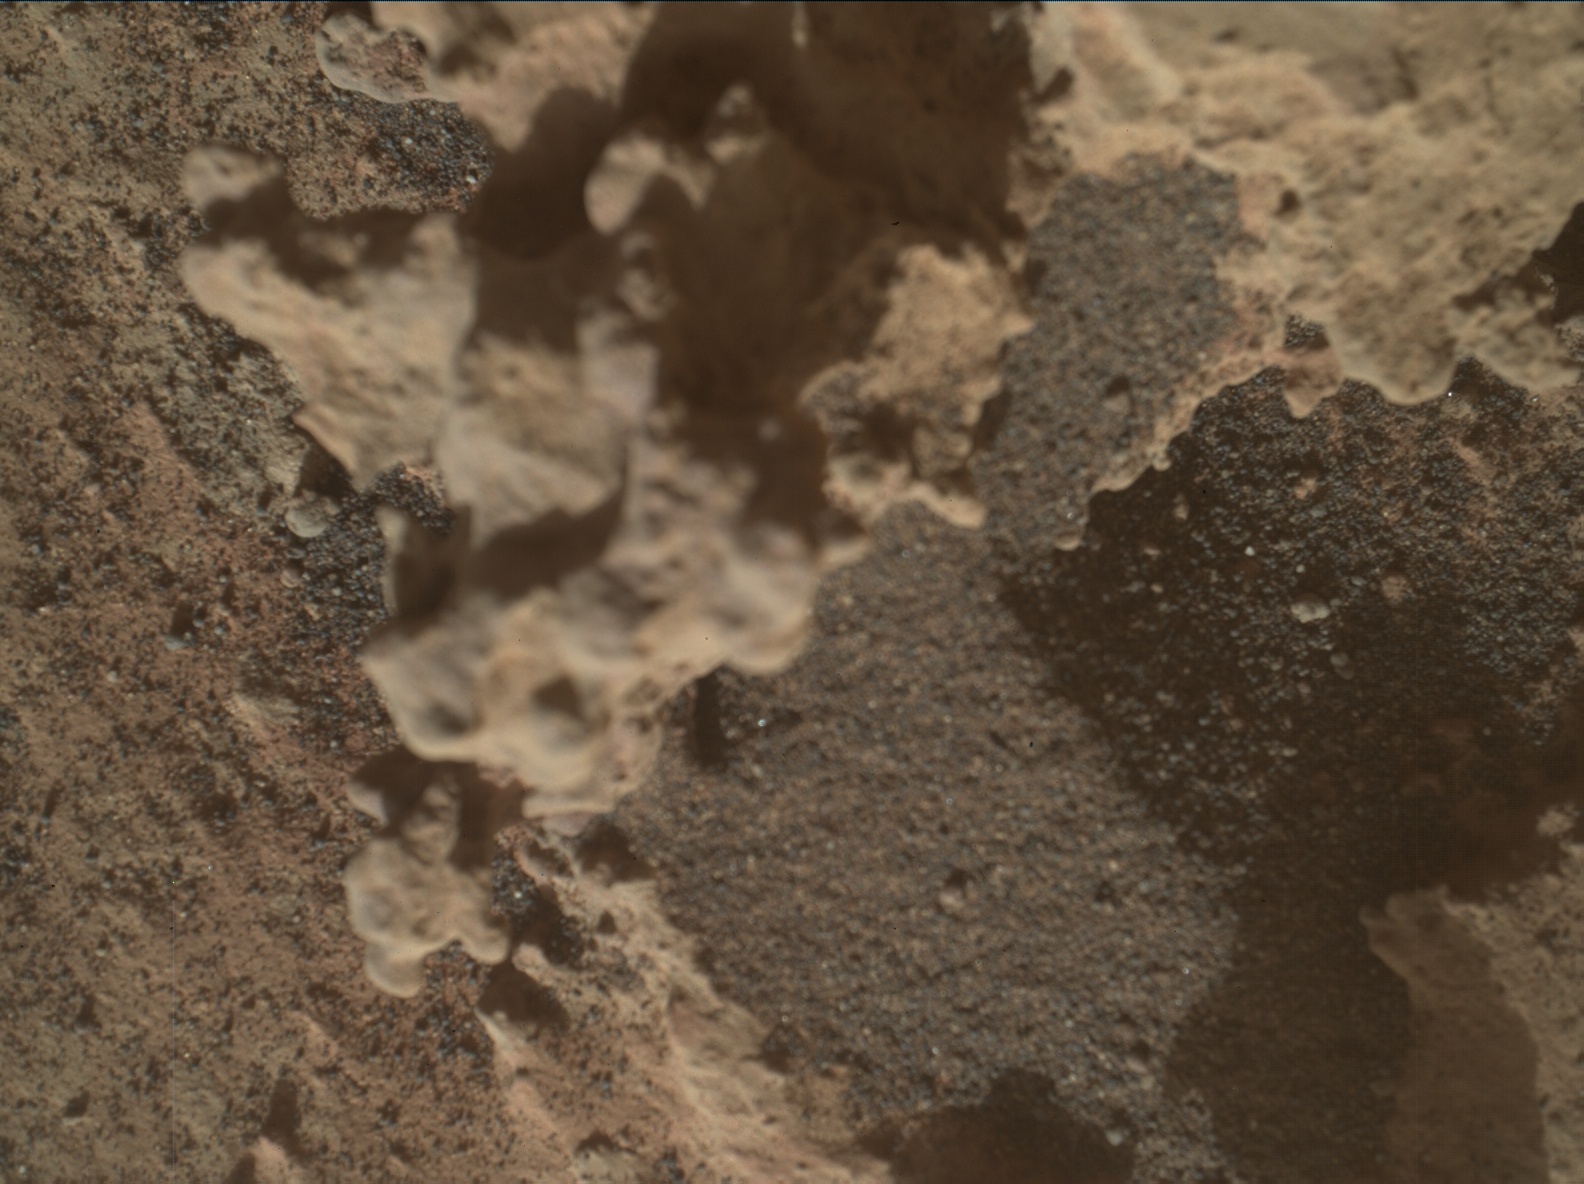 Nasa's Mars rover Curiosity acquired this image using its Mars Hand Lens Imager (MAHLI) on Sol 3146